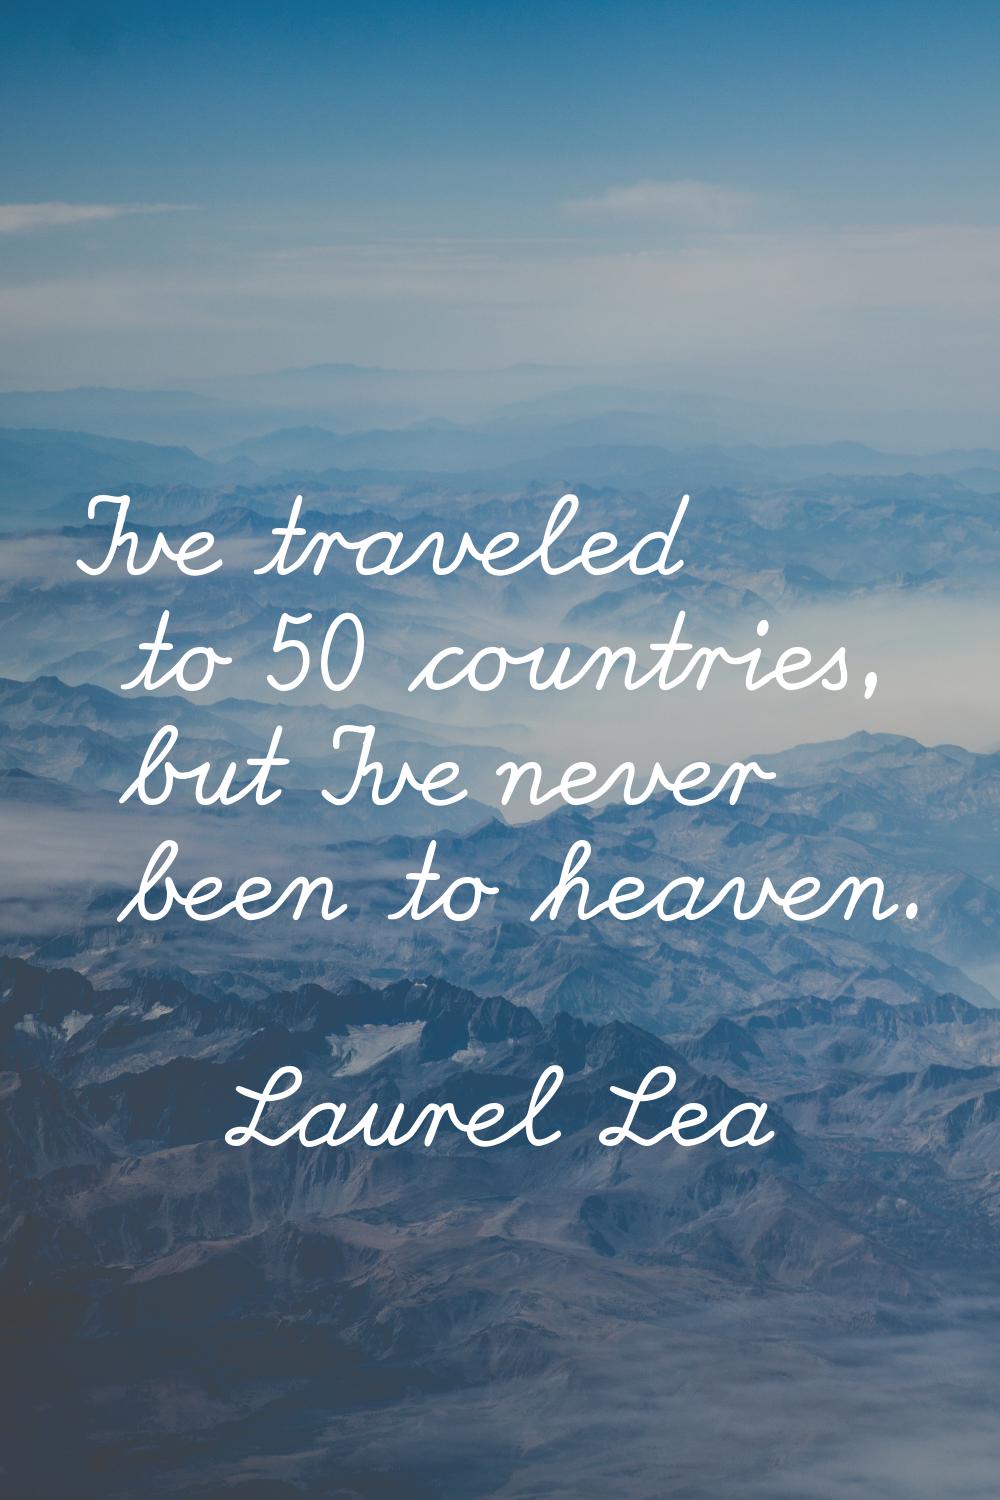 I've traveled to 50 countries, but I've never been to heaven.